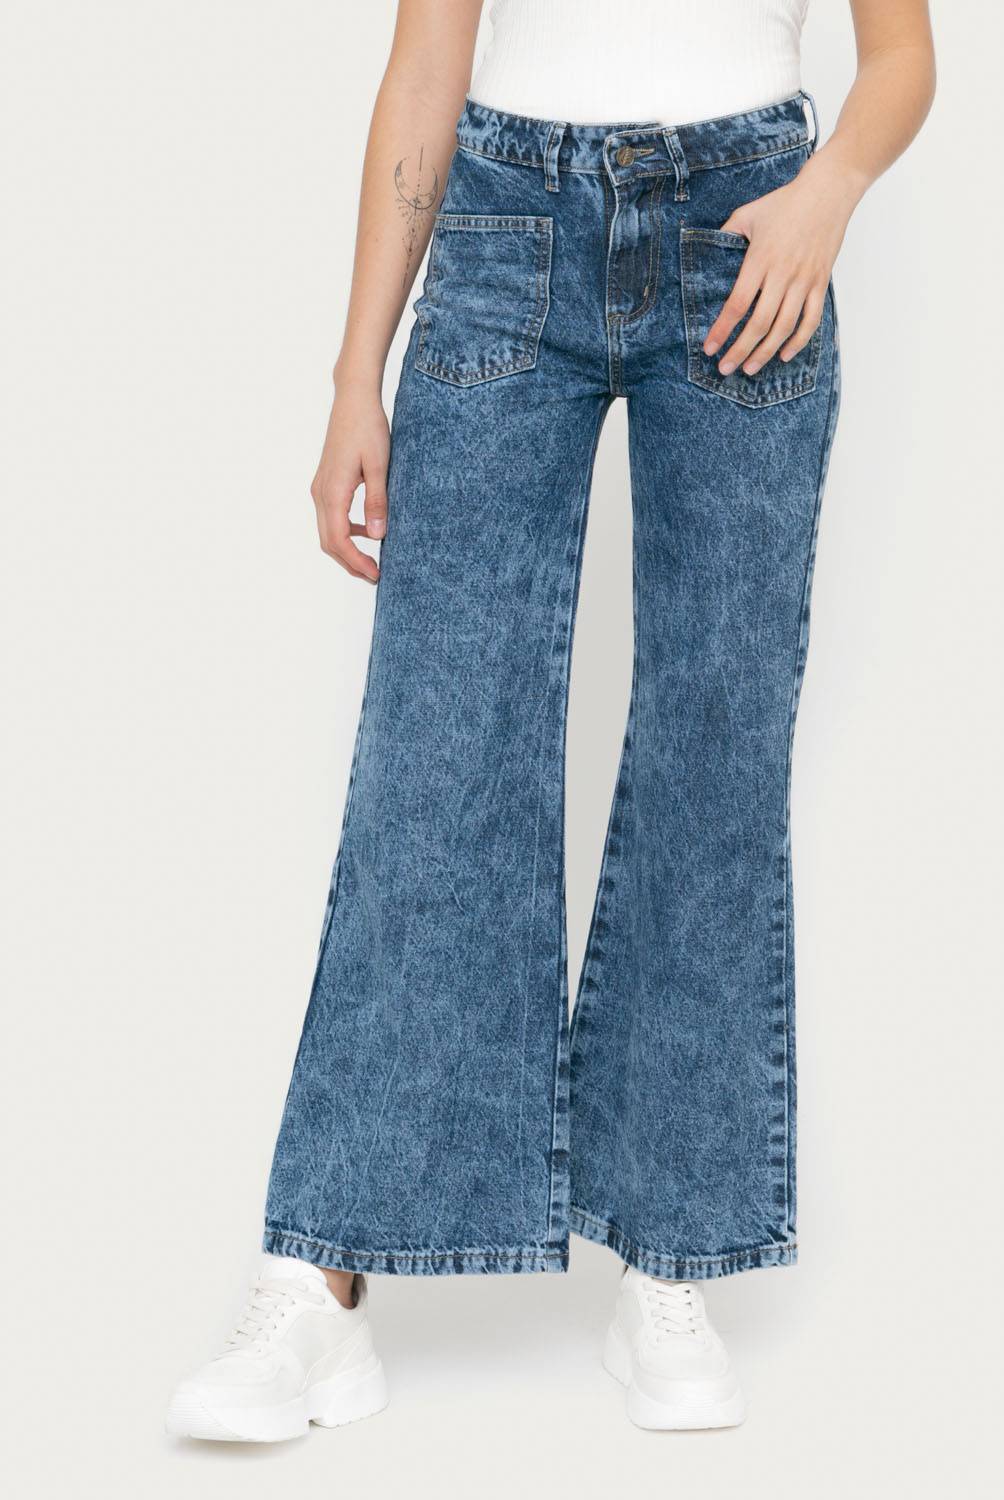 RUPHA - Rupha Jeans Wide Leg Mujer